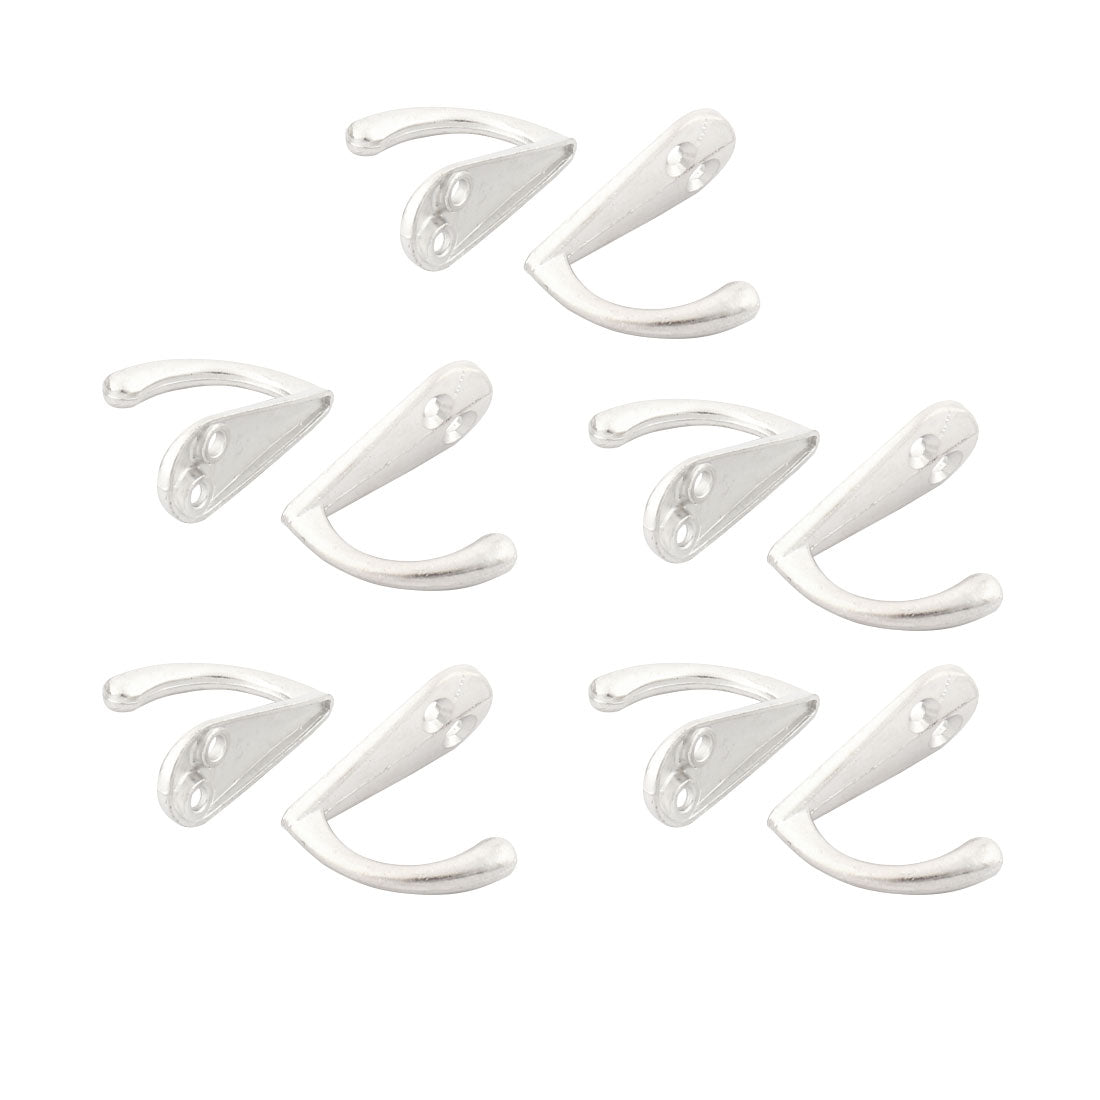 uxcell Uxcell Household Wall Mounted Towel Scarf Bag Cap Keys Hook Hangers Silver Tone 10 Pcs